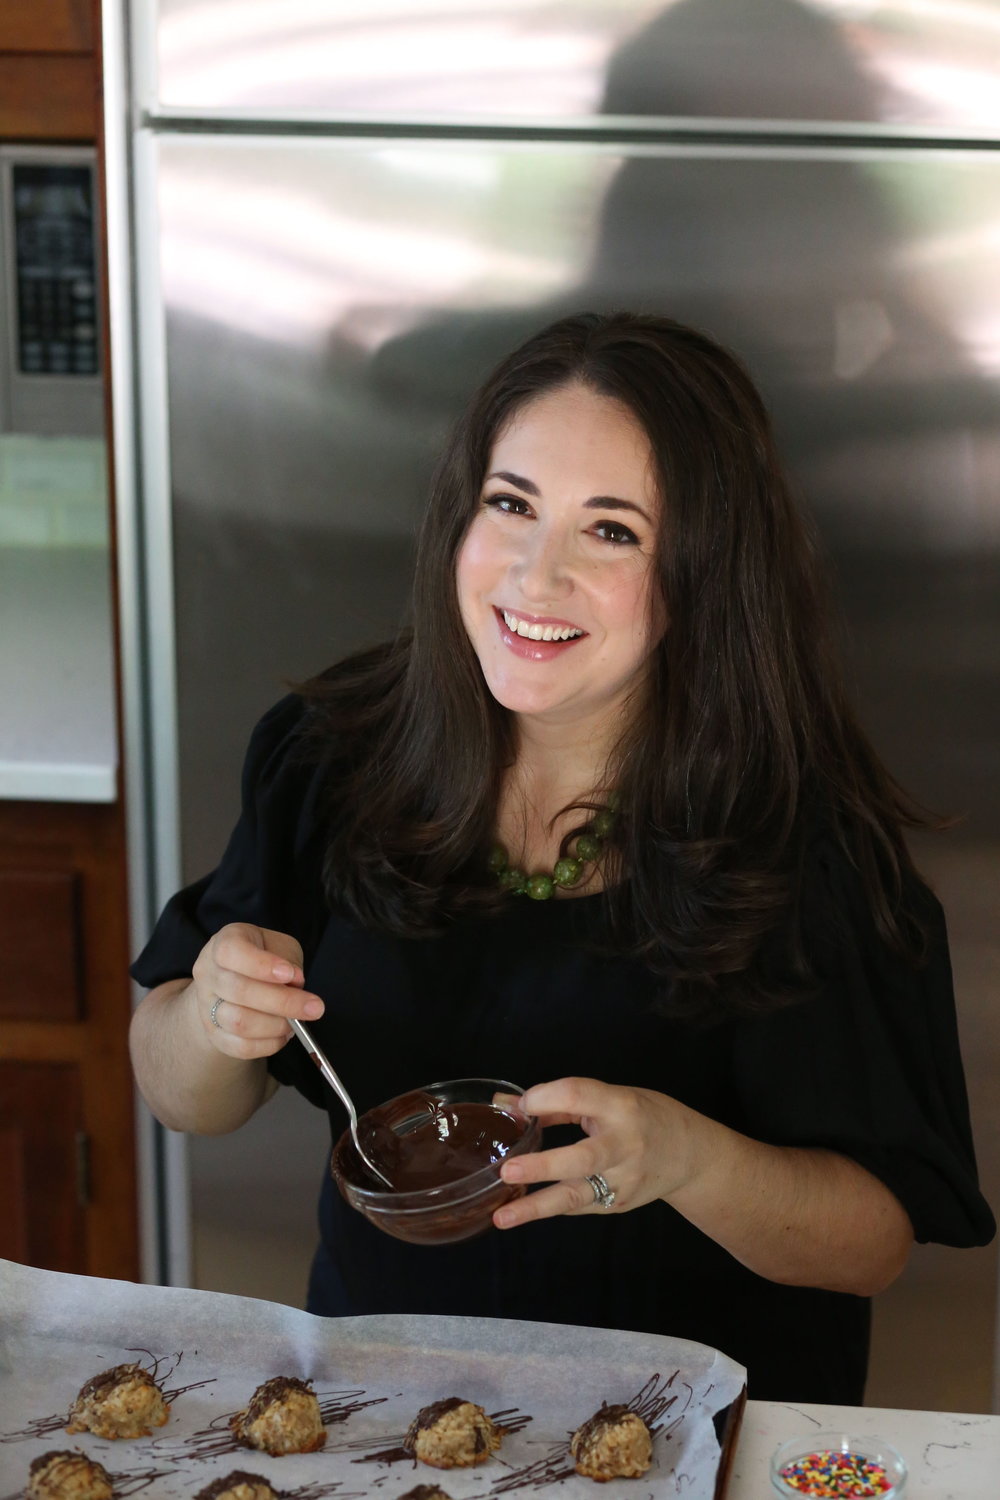 Sarna drizzles melted chocolate over coconut macaroons, one of the sweet recipes in her book.